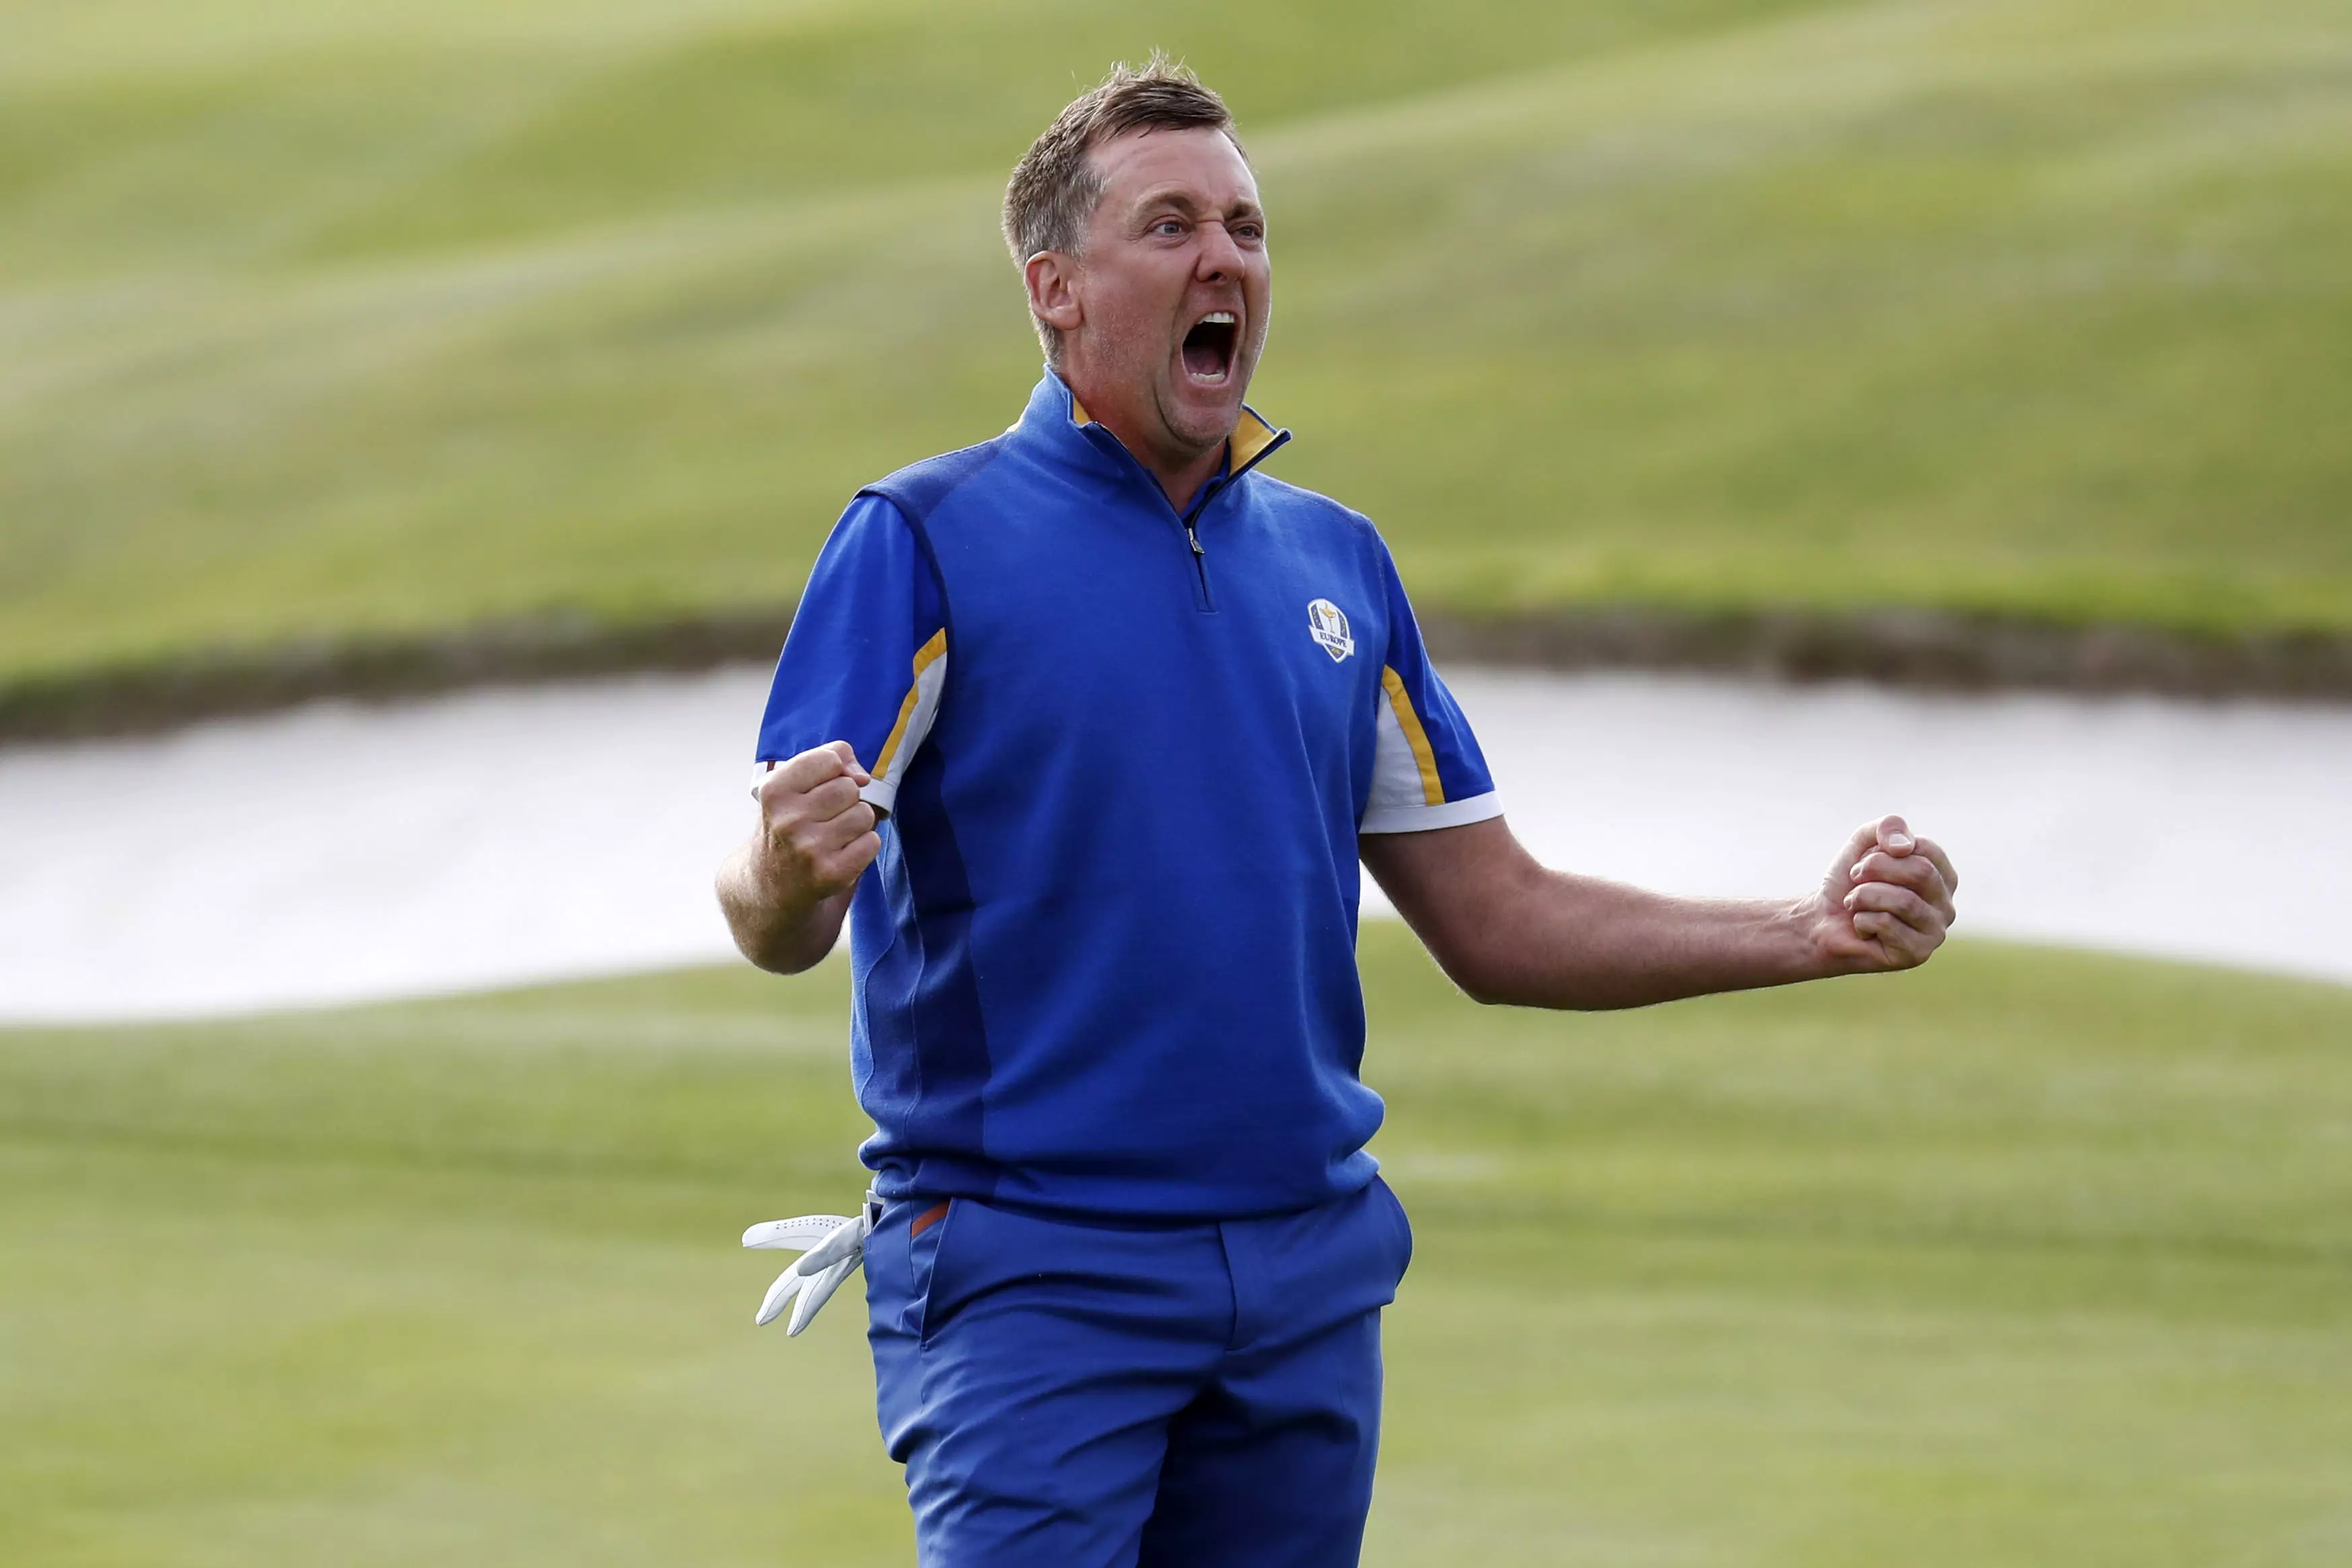 Poulter getting the European crowd fired up. Image: PA Images